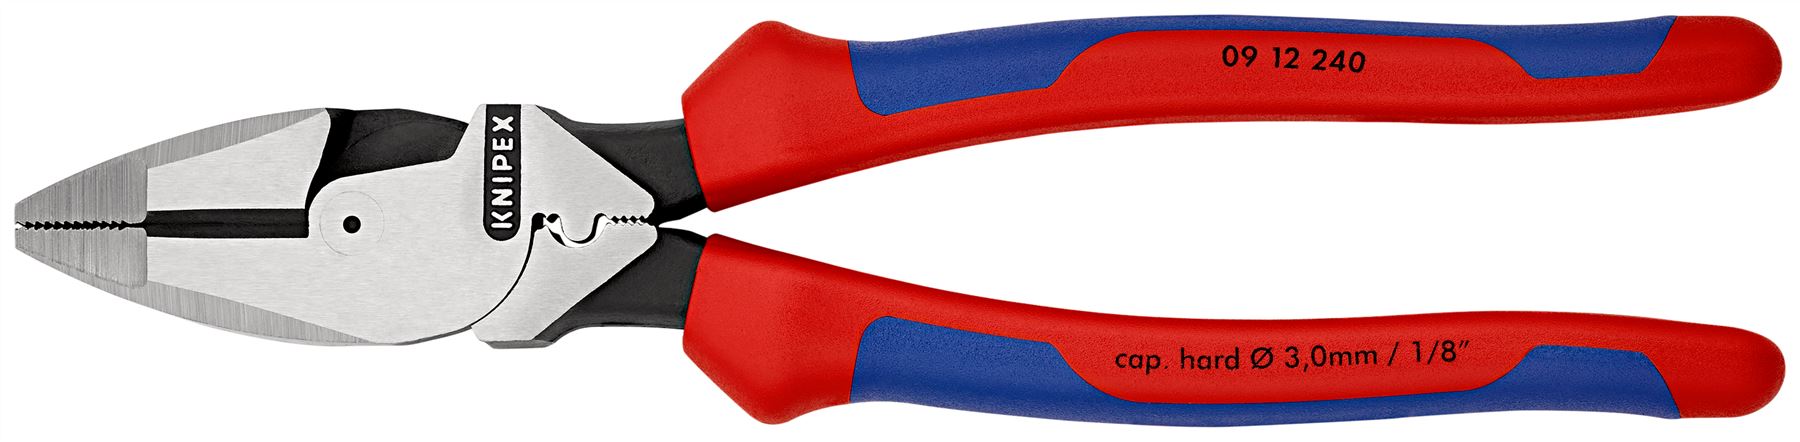 Knipex Linemans Pliers American Style 240mm Multi Component Grips 09 12 240